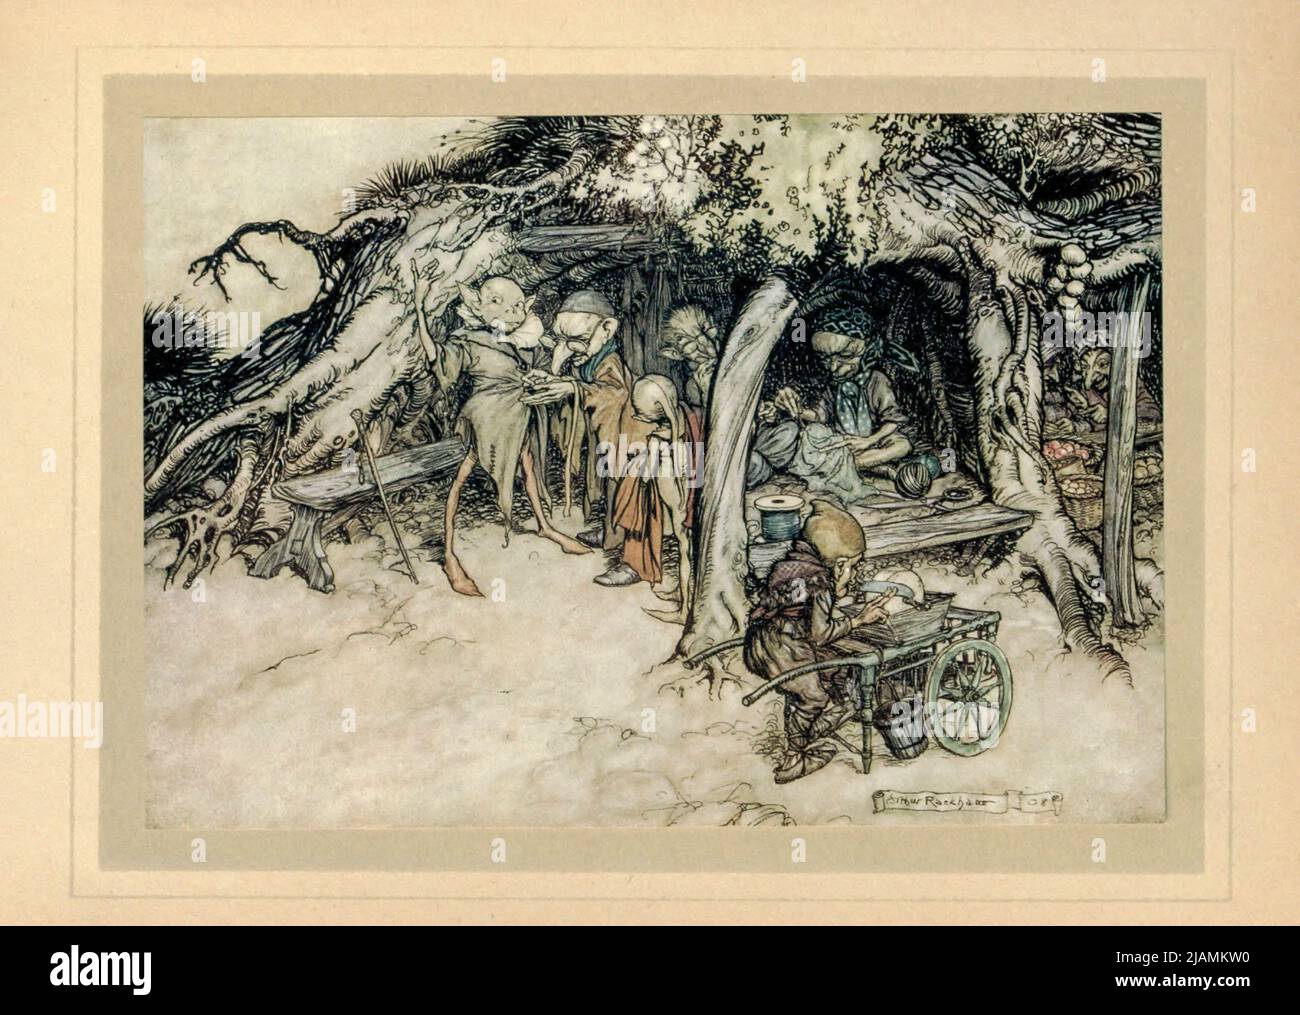 To make my small elves coats from ' A midsummer night's dream ' by William Shakespeare, 1564-1616; Illustrated by Arthur Rackham, 1867-1939 Publication date 1908 Publisher London, Heinemann; New York, Doubleday, Page & Co Stock Photo